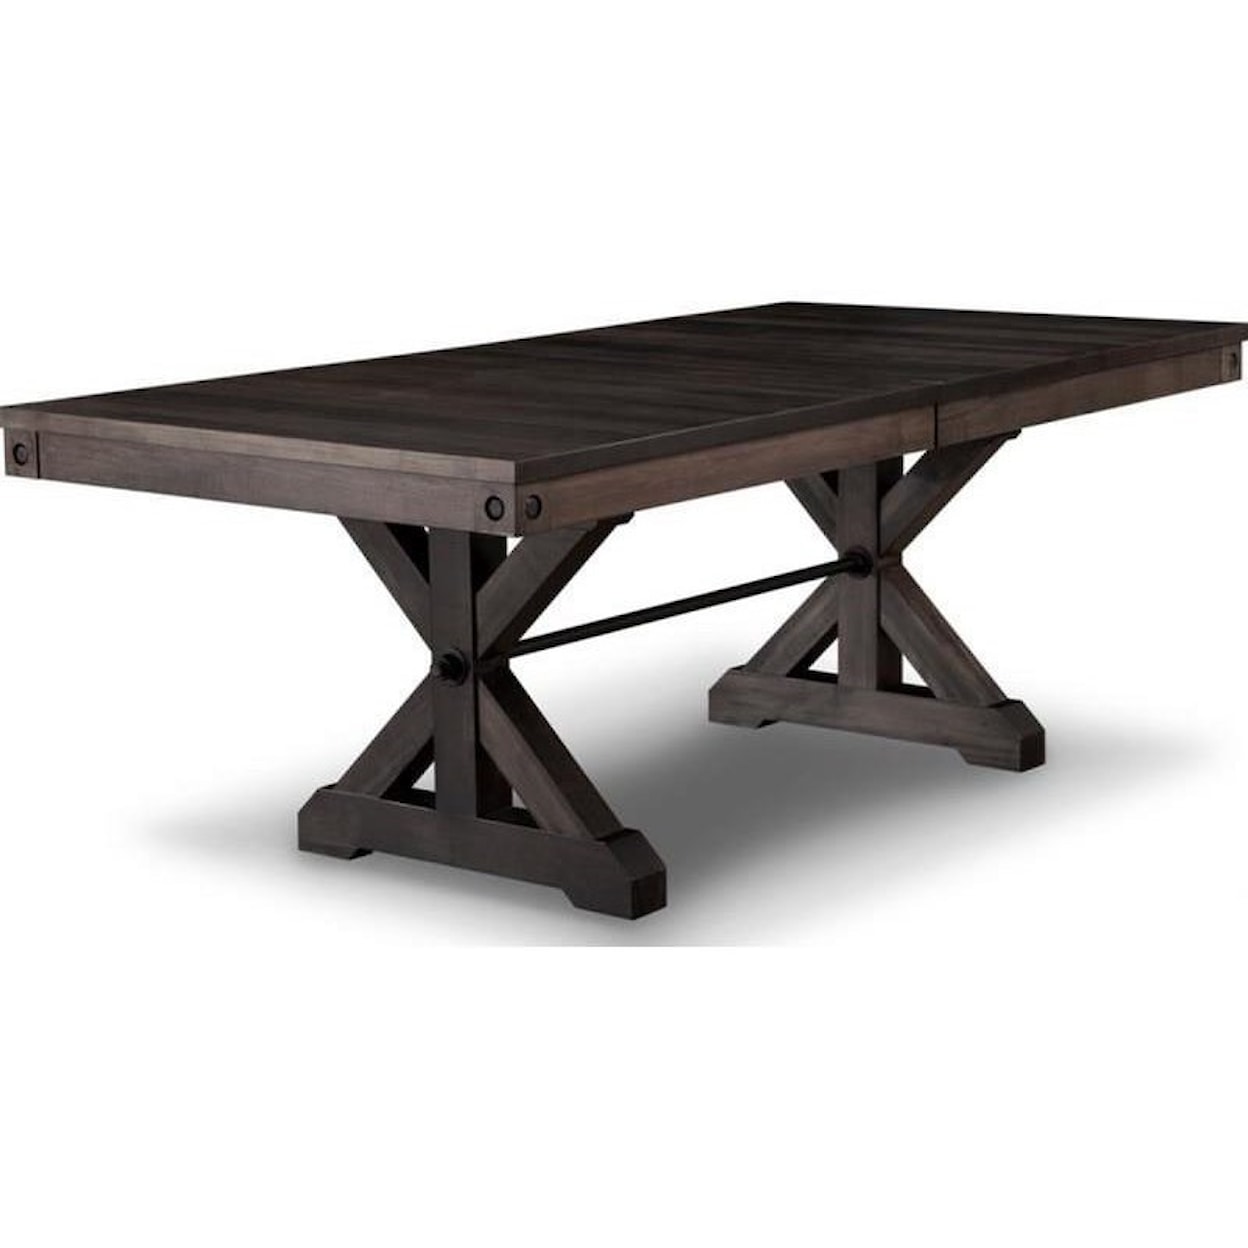 Handstone Rafters 42x96 Solid Top Trestle Table with 2-18" BrH